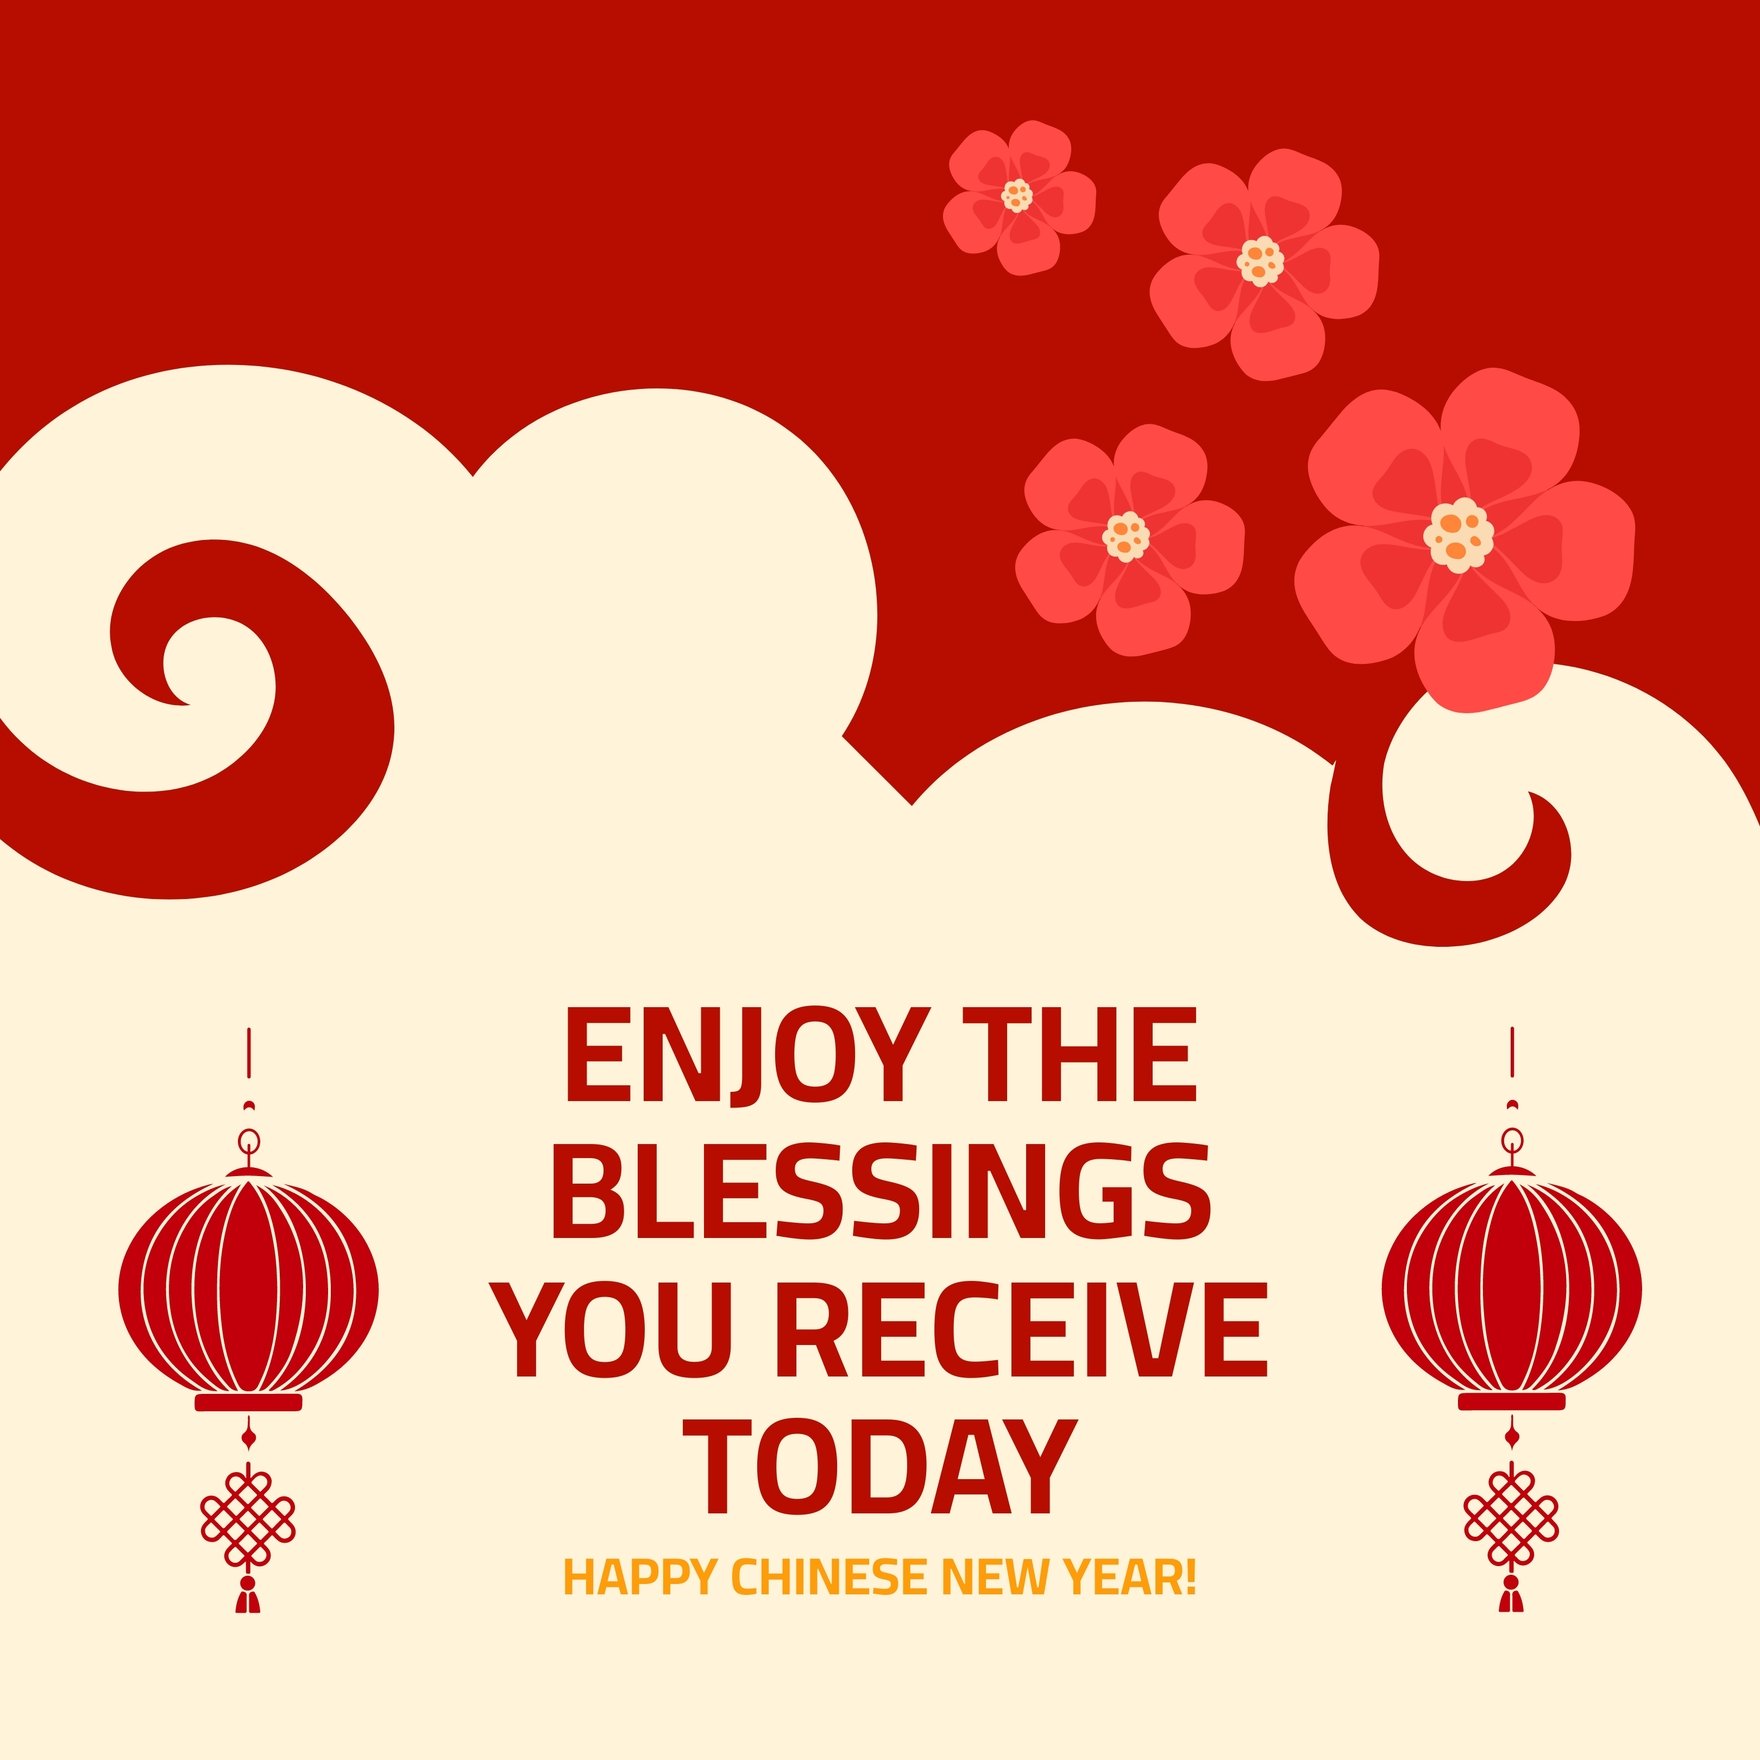 Chinese New Year Instagram Post in Illustrator, PSD, EPS, SVG, PNG, JPEG